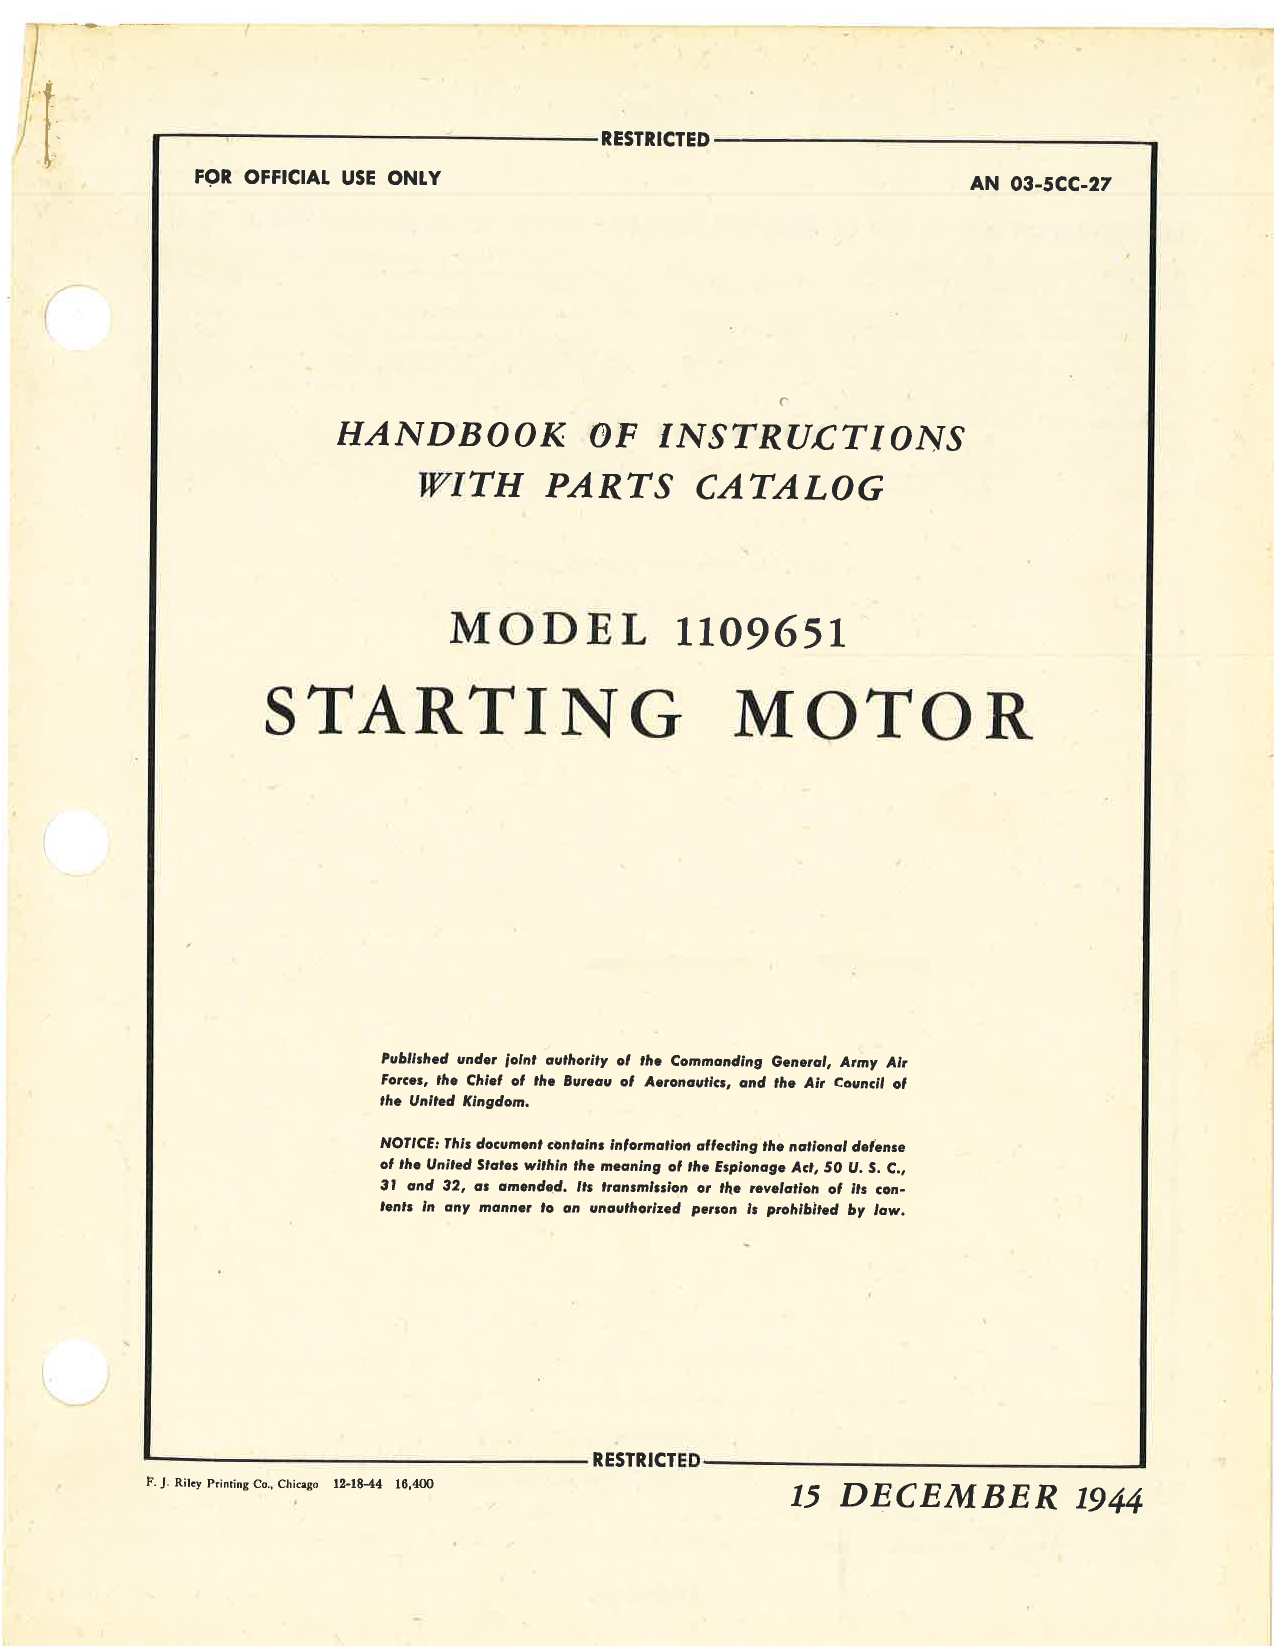 Sample page 1 from AirCorps Library document: Handbook of Instructions with Parts Catalog for Model 1109651 Starting Motor